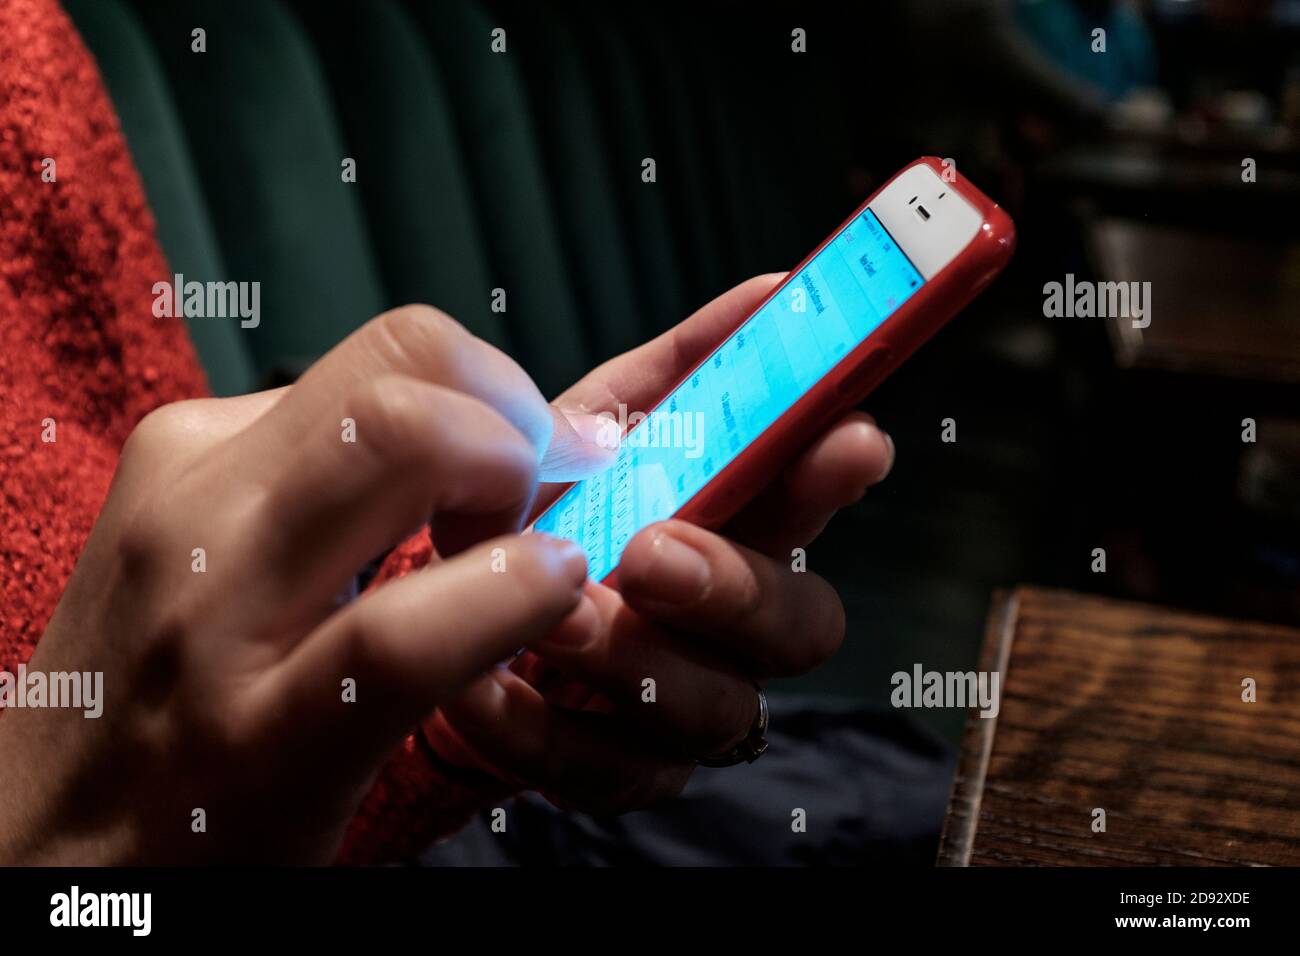 Woman texting on touch screen smart phone Stock Photo